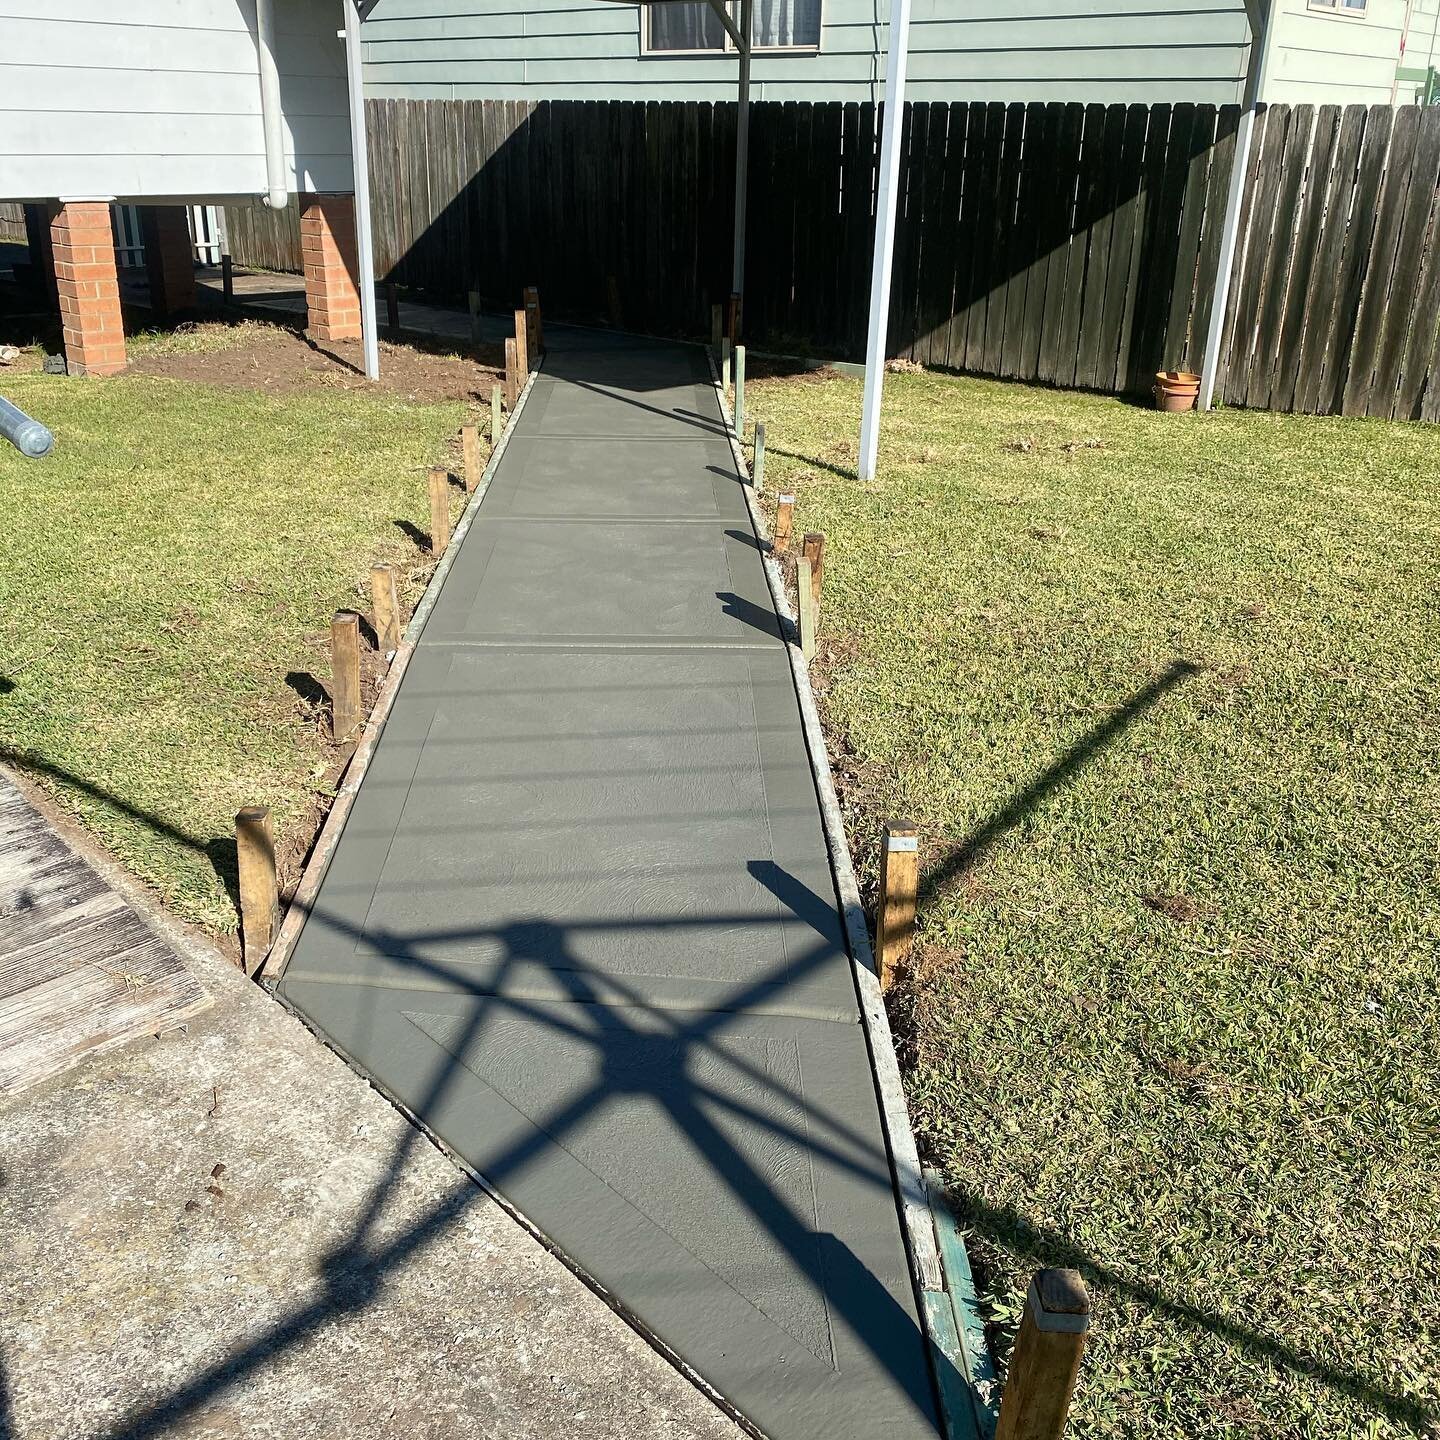 Our client needed some new pathways for easier access. No problem, no job to small for #skcreativeconcreting #kilarneyvale 

Let&rsquo;s Get Creative and Let&rsquo;s Get Concreting
#driveways #paths #concrete #garage #carport #skcreativeconcreting
Gi